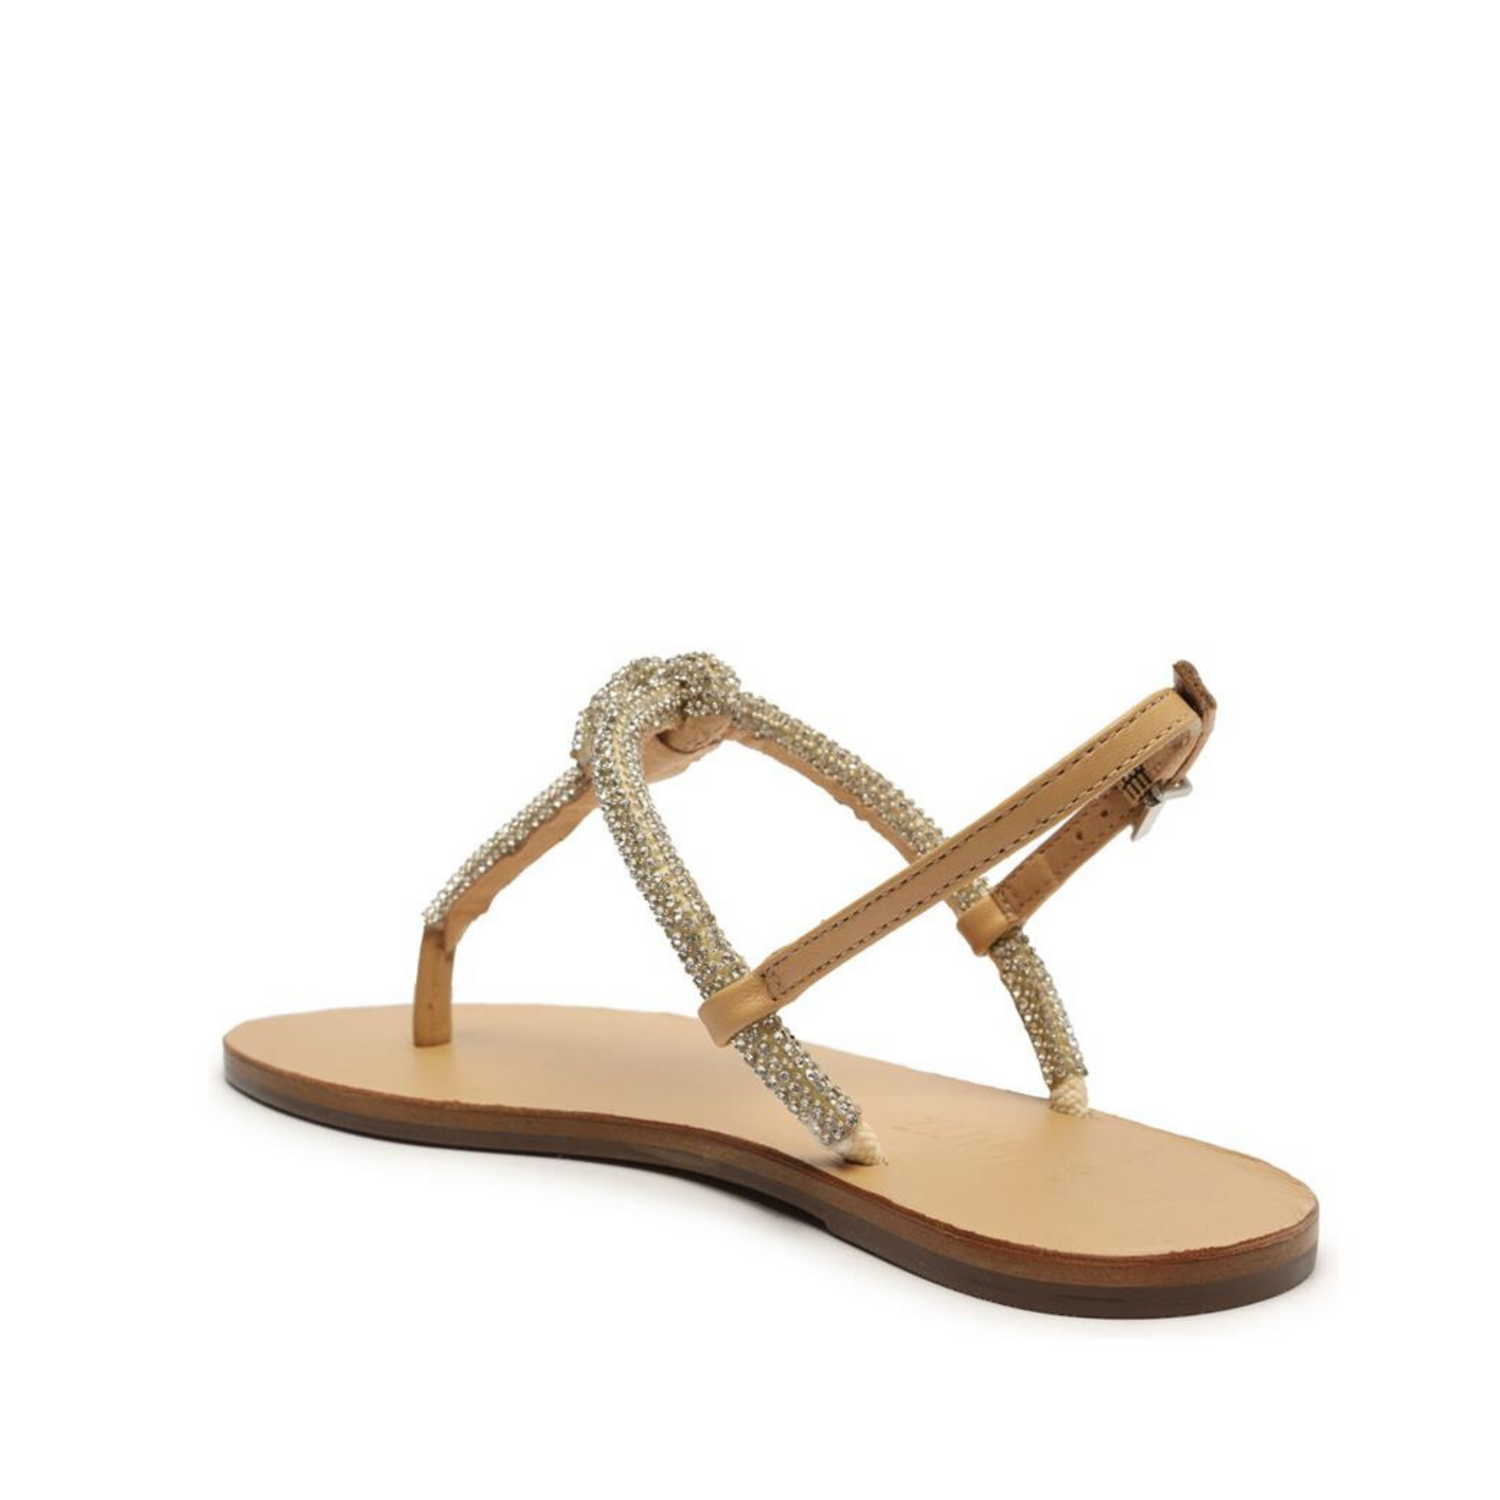 Pearly Nappa Leather Sandal Flats OLD    - Schutz Shoes